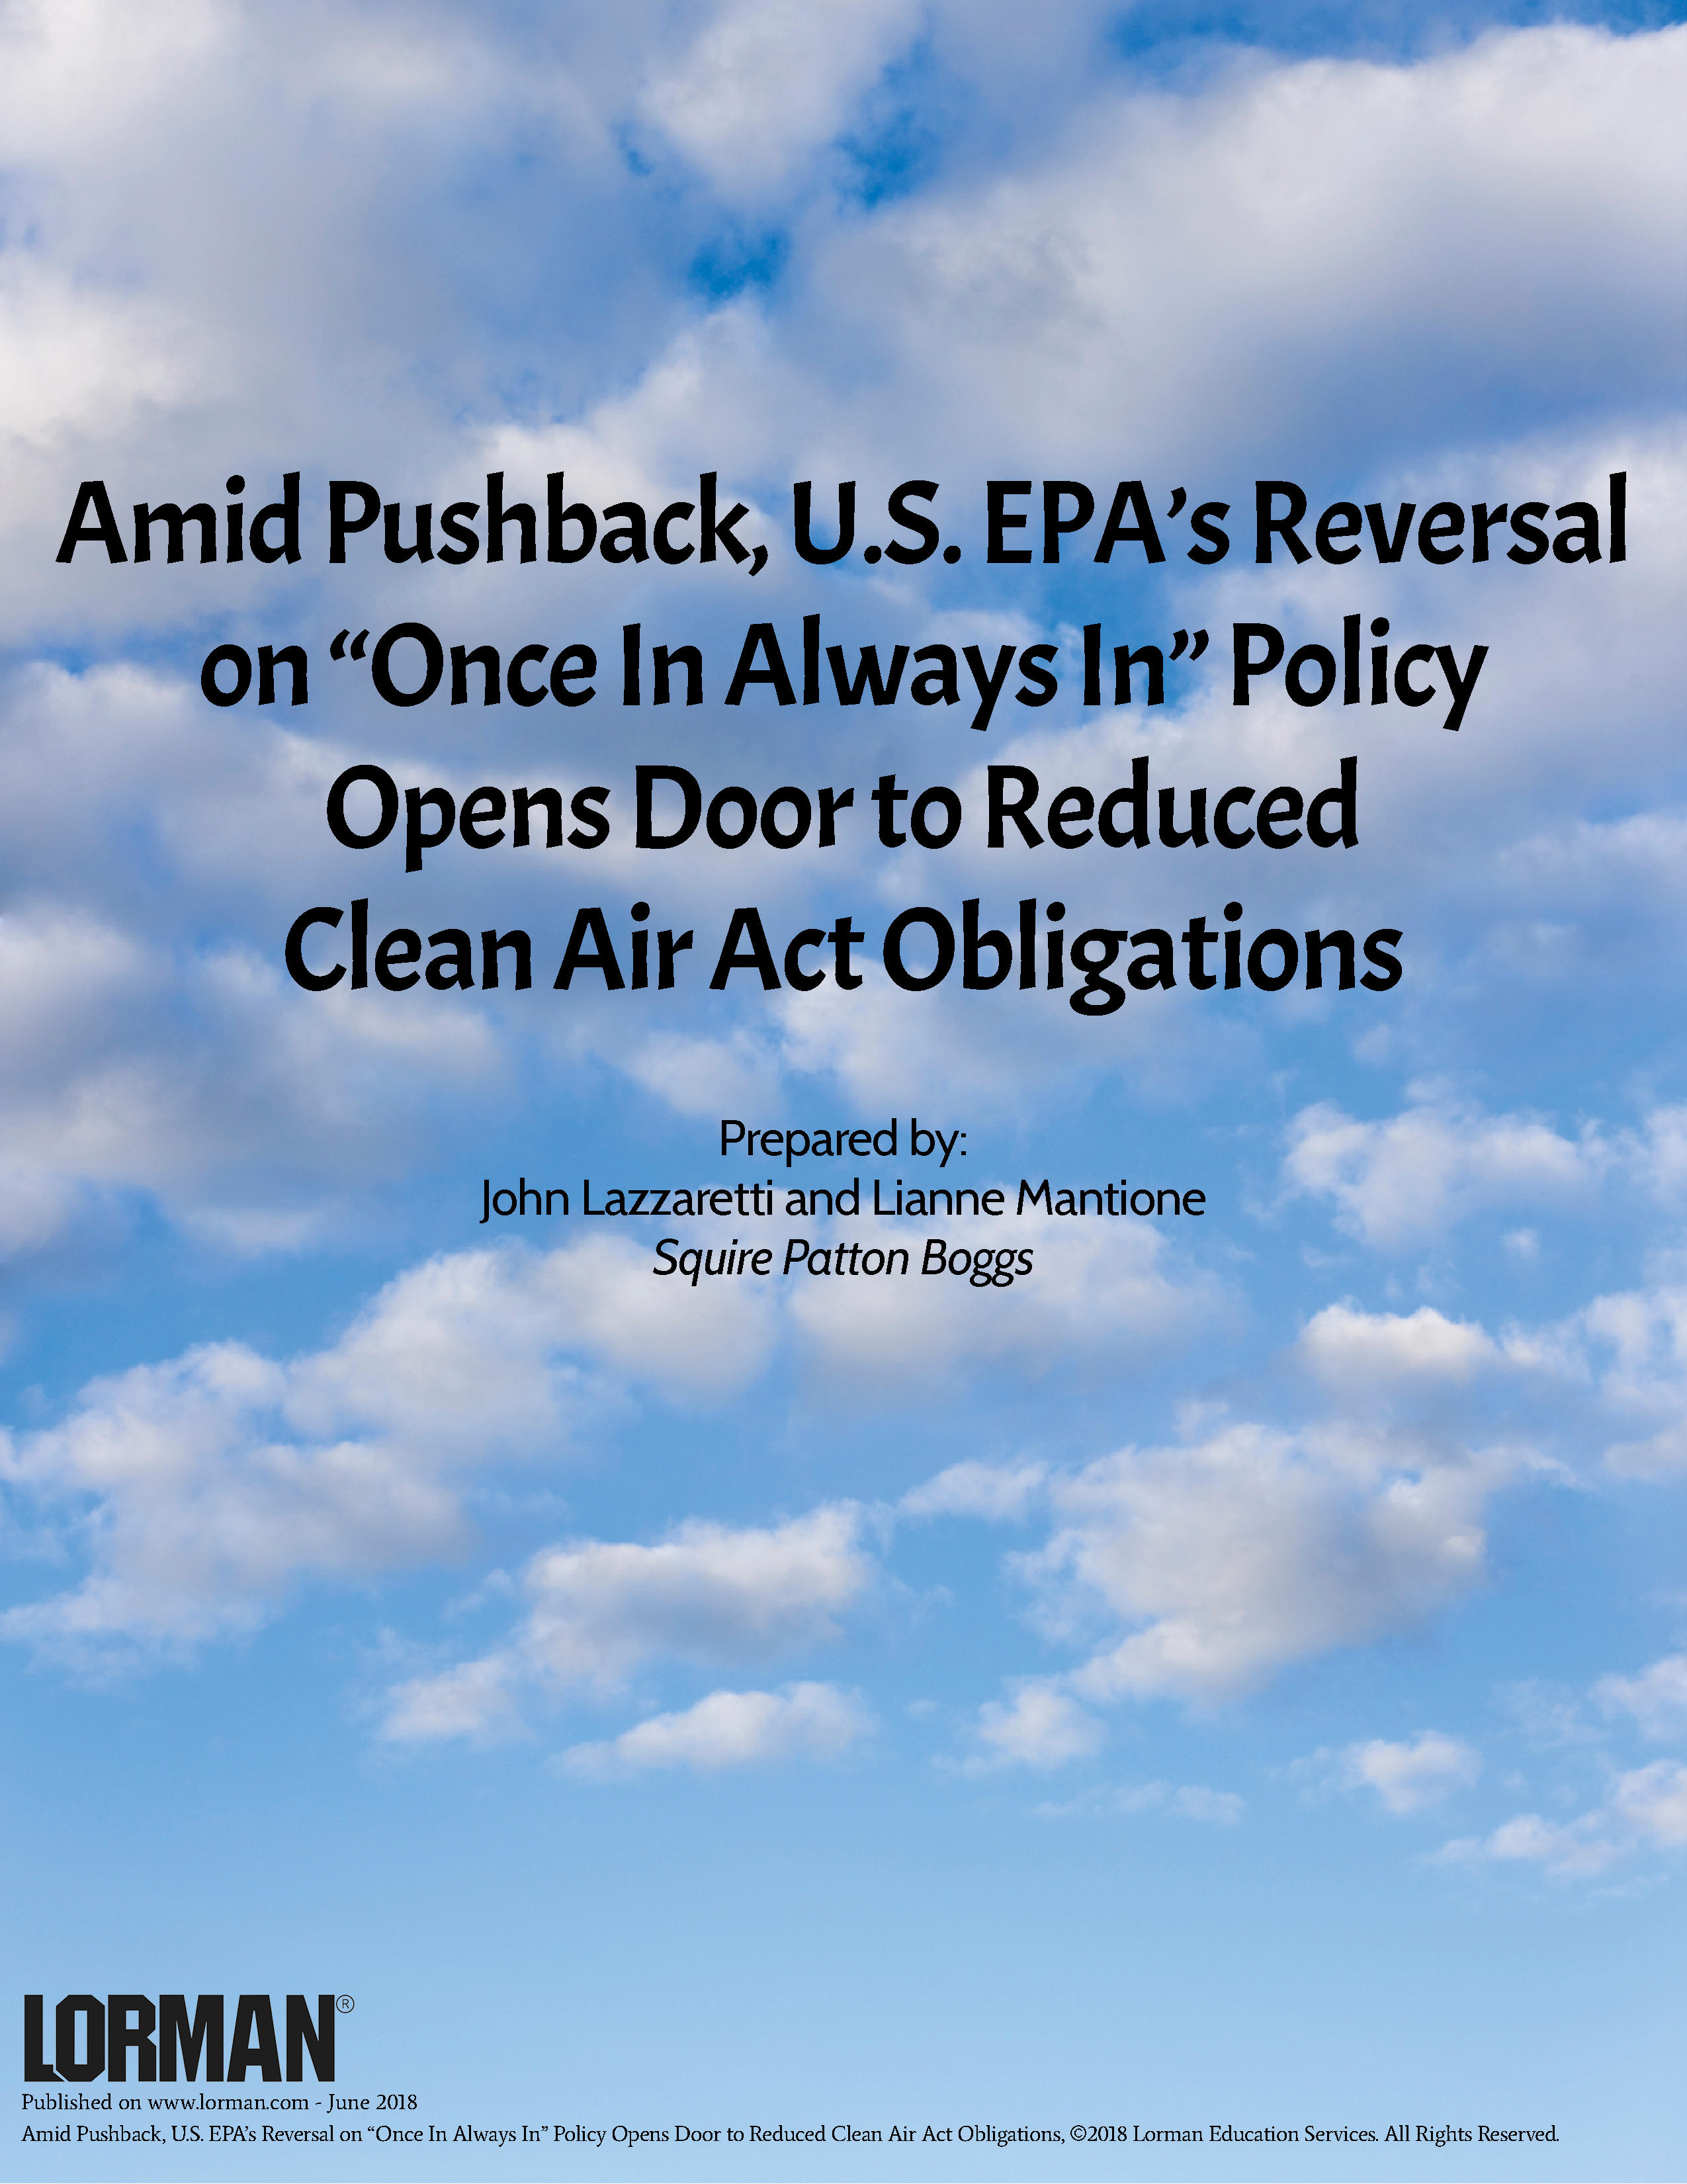 U.S. EPA’s Reversal on “Once In Always In” Policy Opens Door to Reduced Clean Air Act Obligations